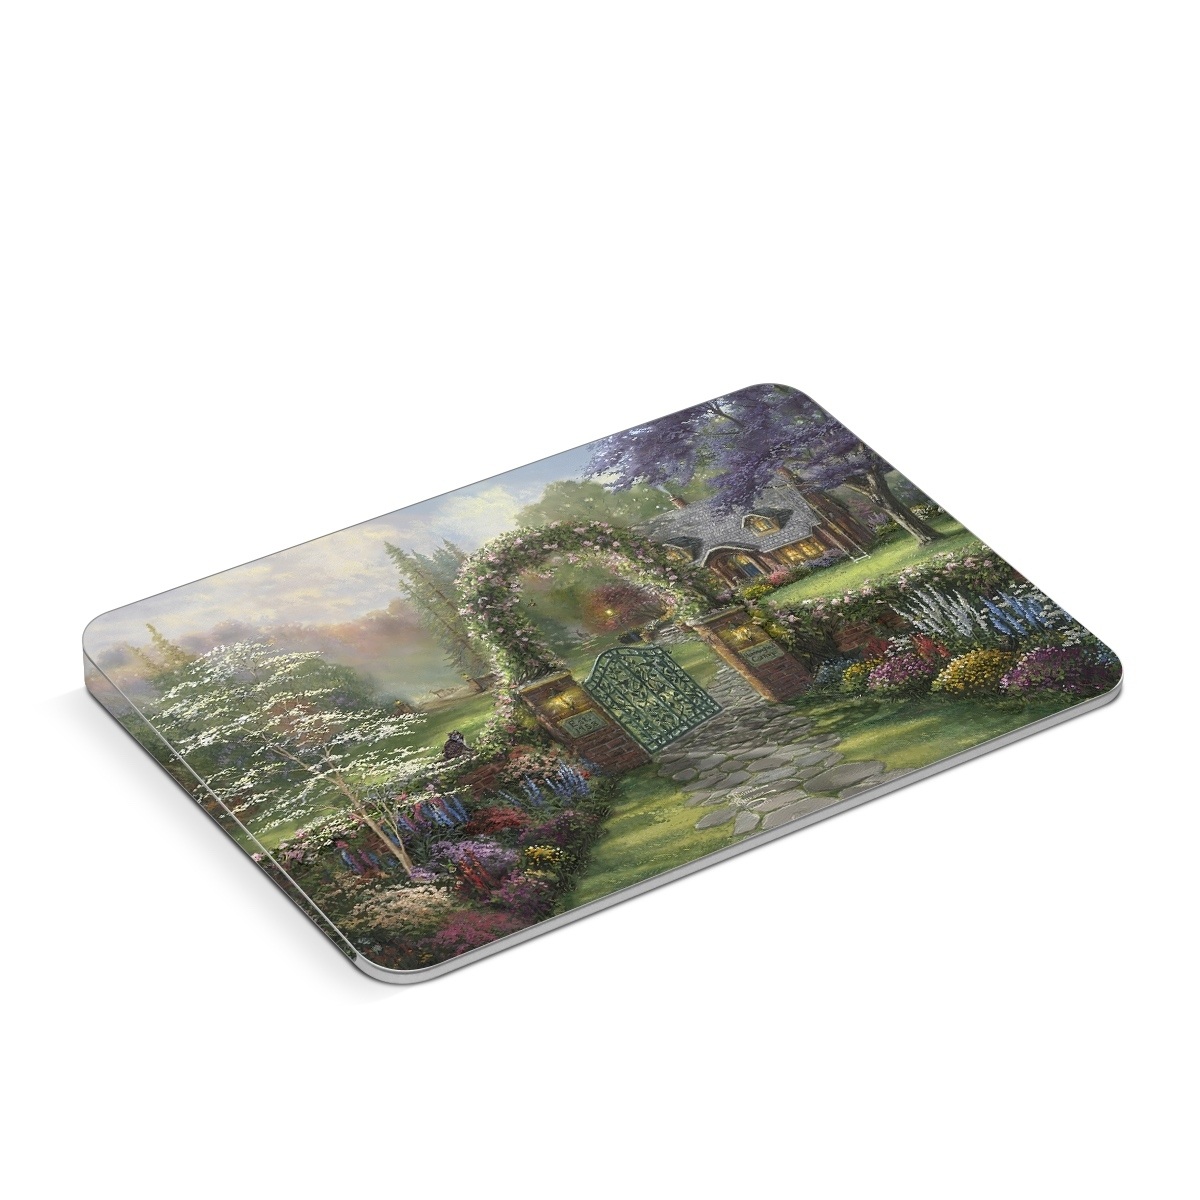 Apple Magic Trackpad Skin design of Plant, Cloud, Flower, Sky, Plant community, Tree, Natural landscape, Paint, Grass, Shrub, with green, purple, white, blue, yellow, pink, red colors